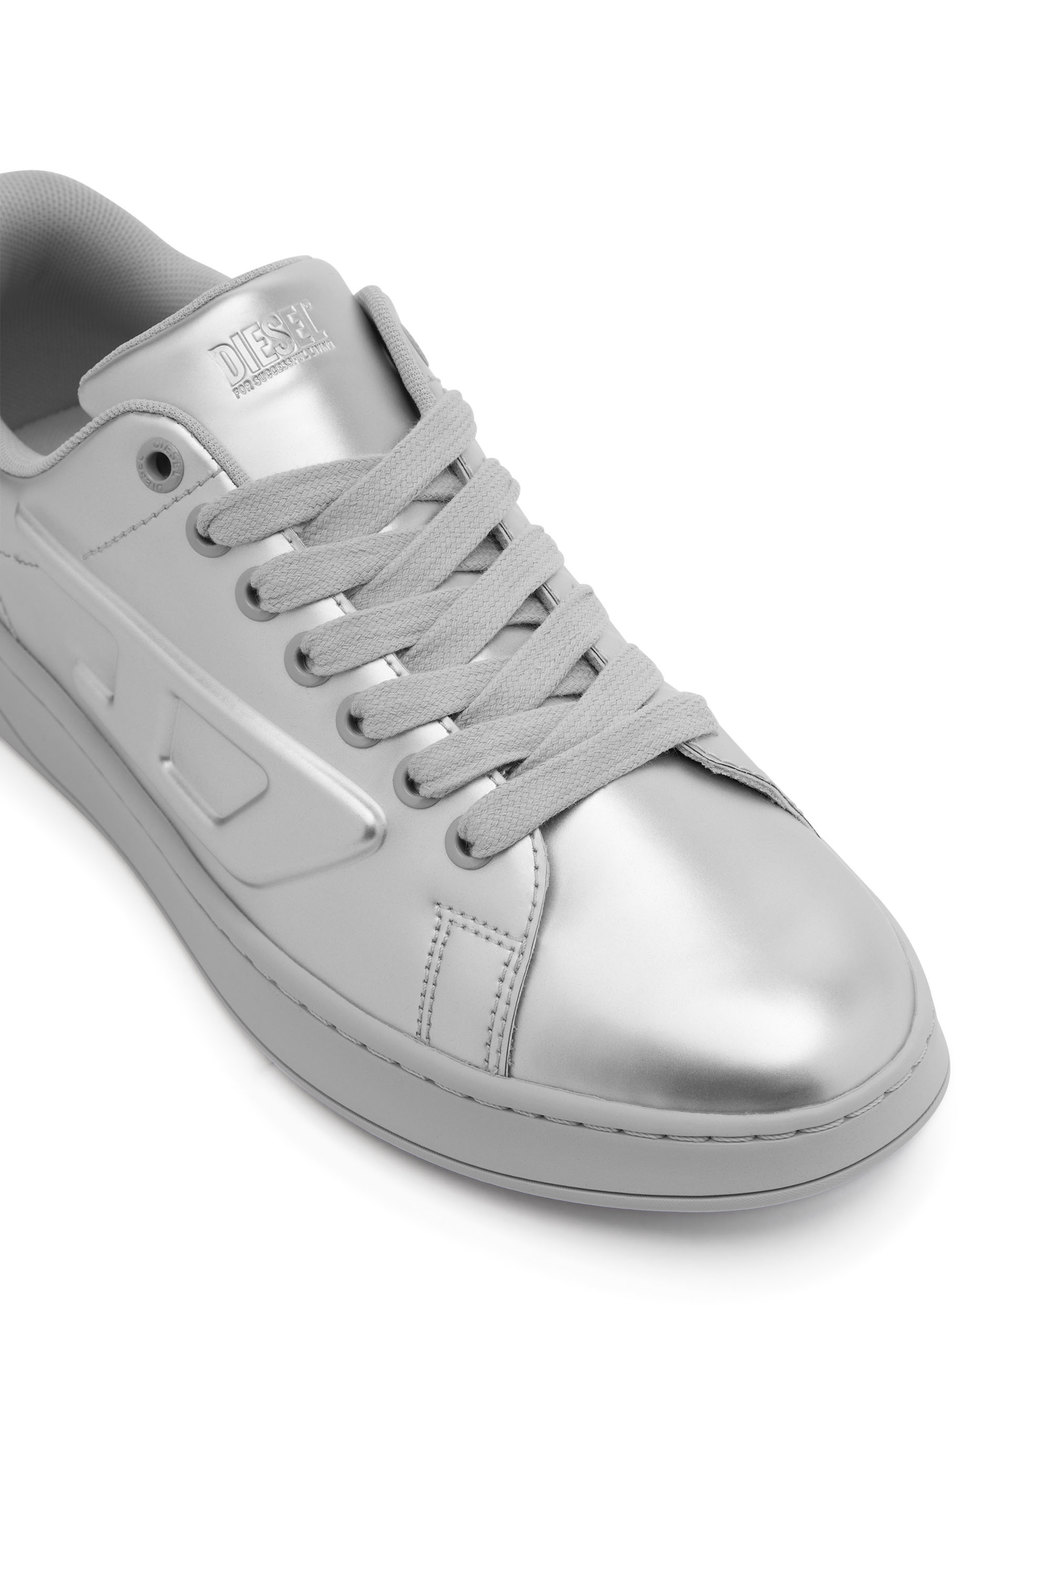 S-Athene Low W - Metallic sneakers with embossed D logo